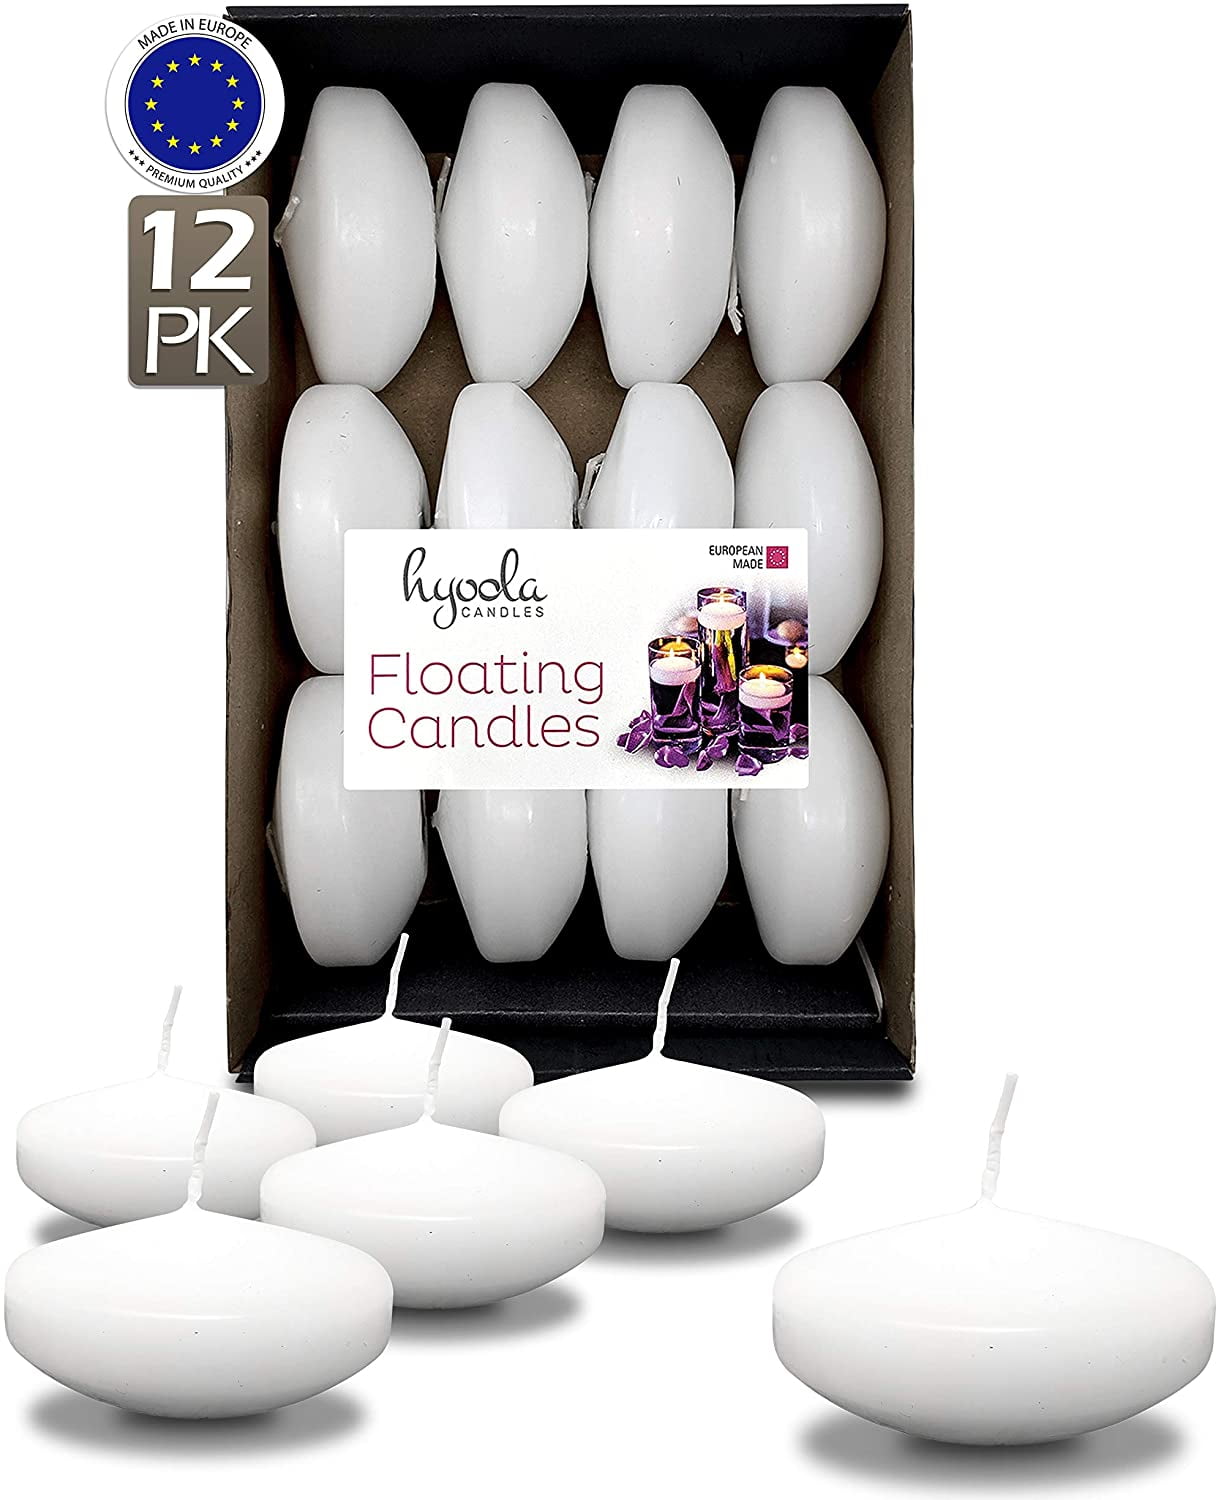 80 Pack 4 Hour European Made Hyoola Premium Ivory Floating Candles 2 inch 